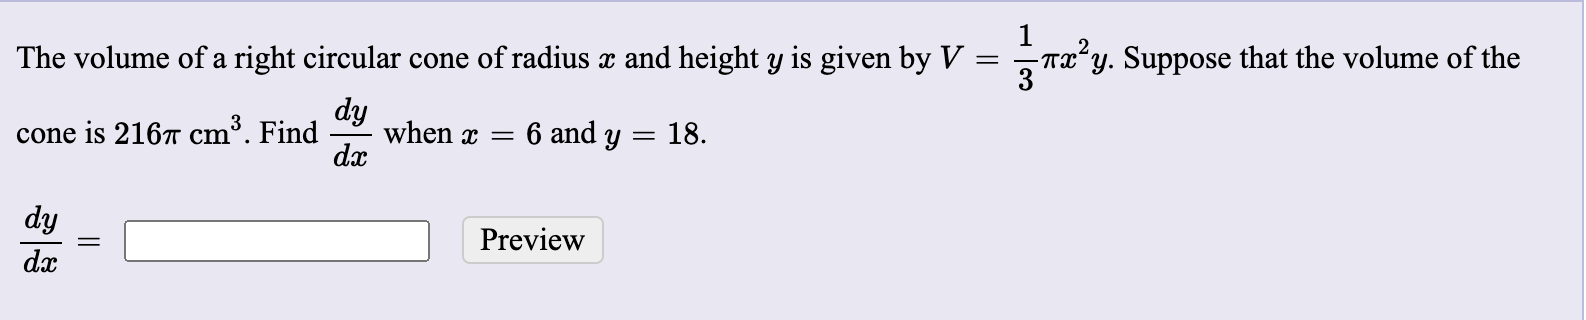 The volume of a right circular cone of radius x and height y is given by V
- Tx²,
'y. Suppose that the volume of the
3
dy
when x = 6 and y = 18.
dx
cone is 2167 cm³. Find
dy
Preview
dx
||
